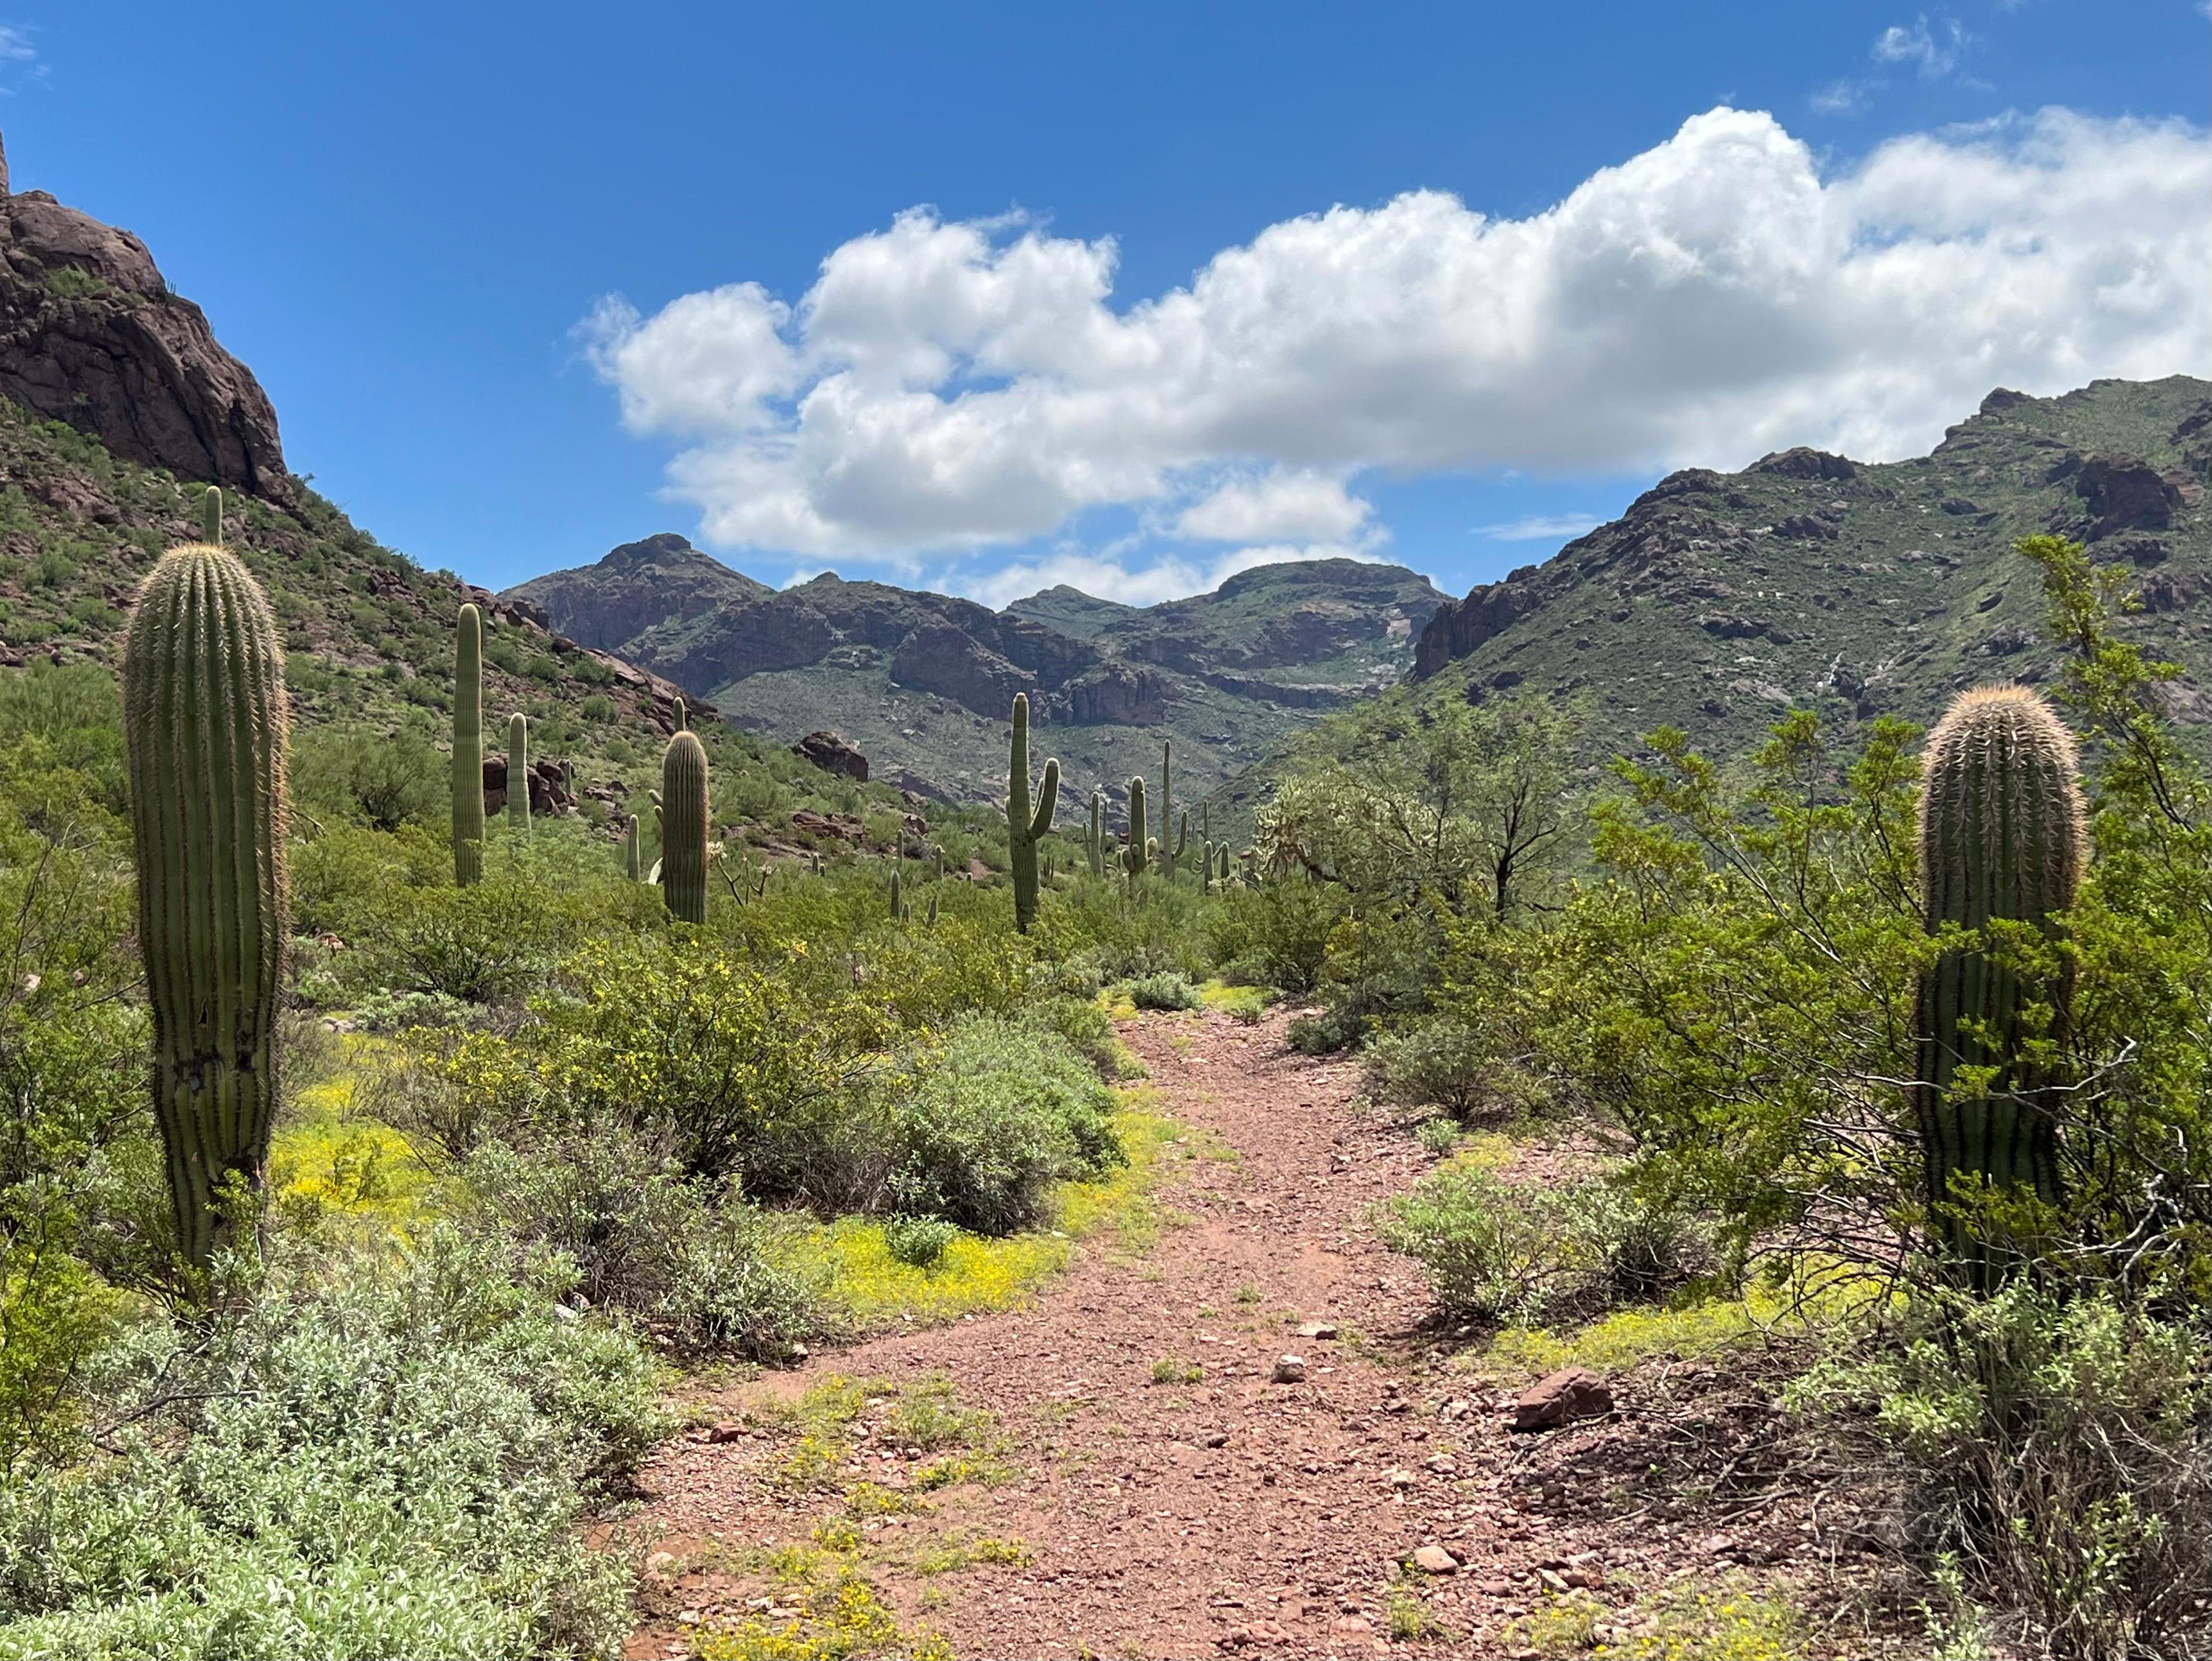 The Alamo Canyon trail is surrounded by many kinds of cacti and leads into the mountains